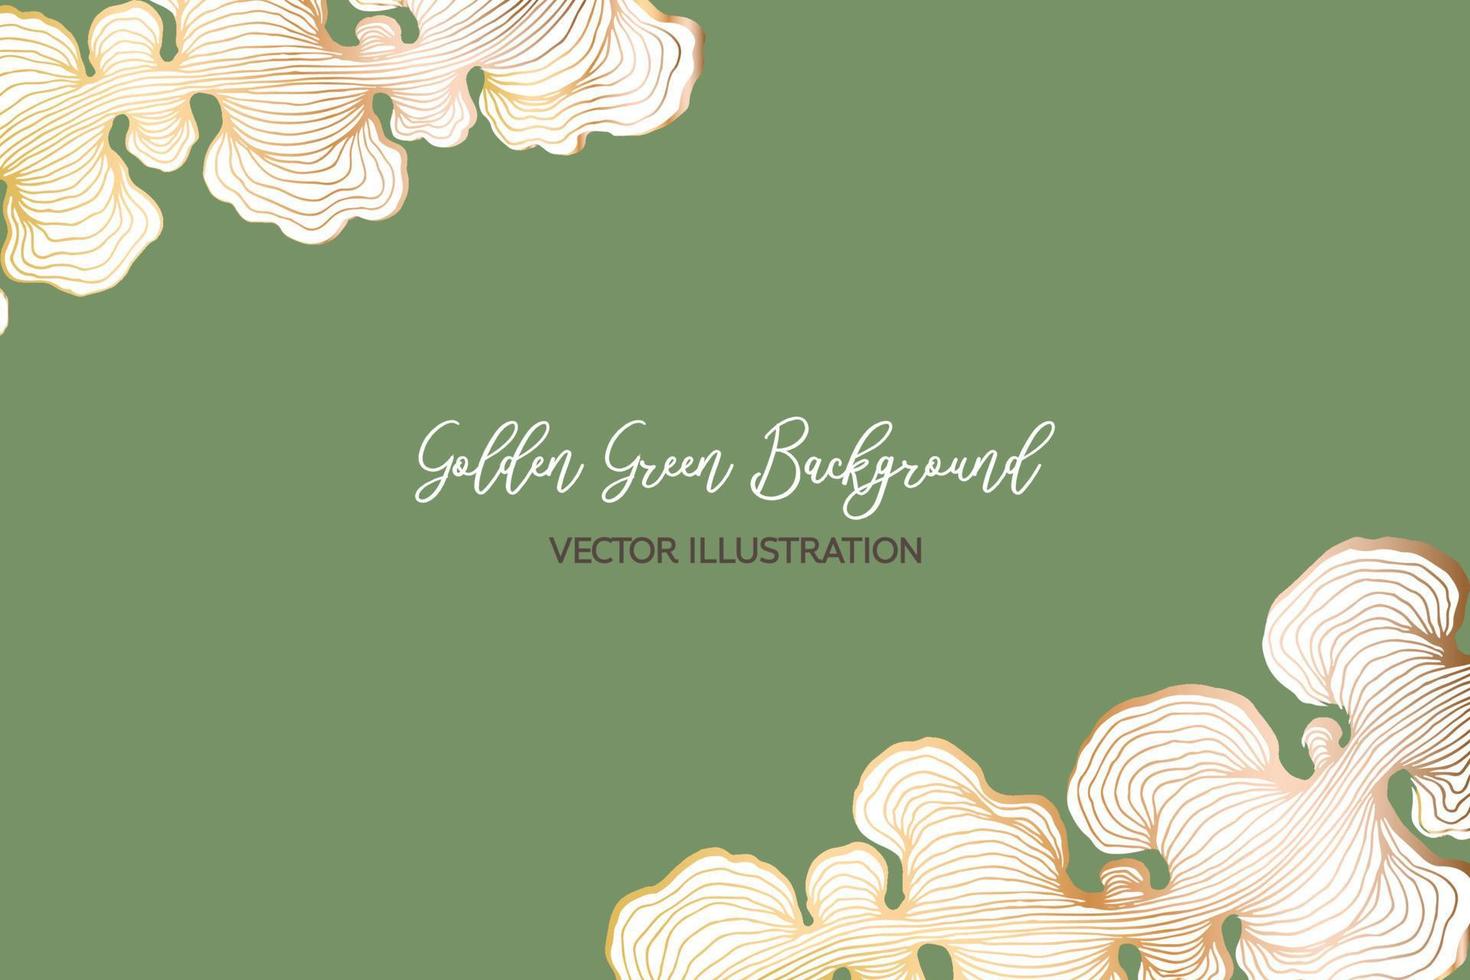 Abstract metallic golden green luxury background. Green wallpaper vector illustration with swirly organic lines.